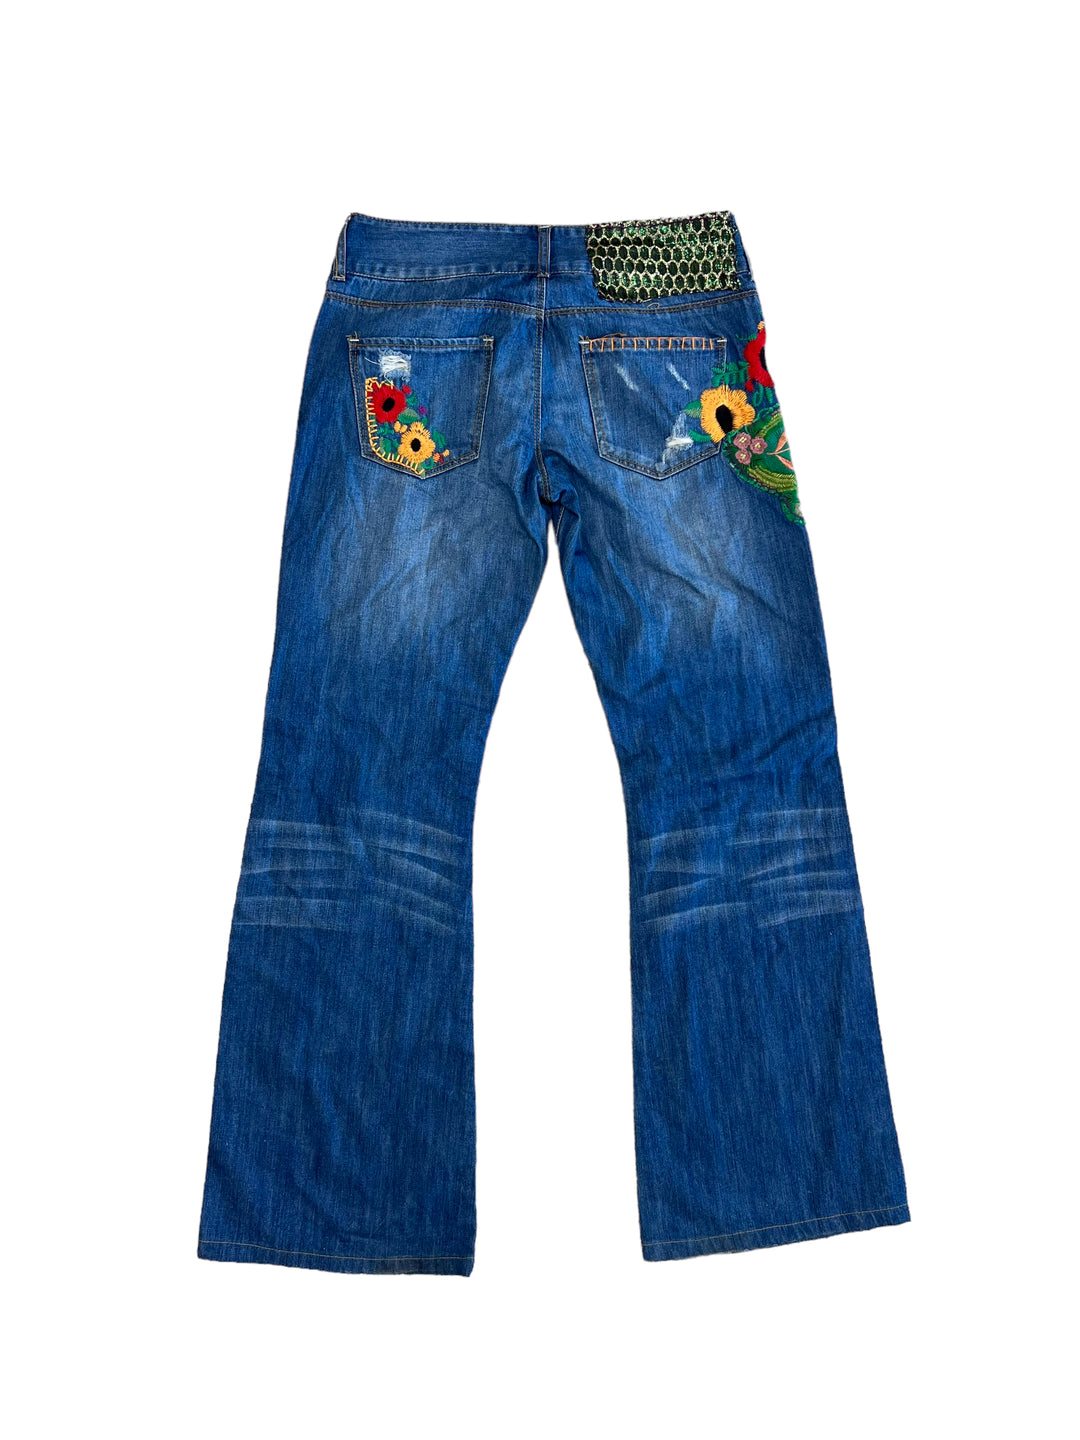 Desigual Mid Weist Patches Jeans Women’s Small(36)